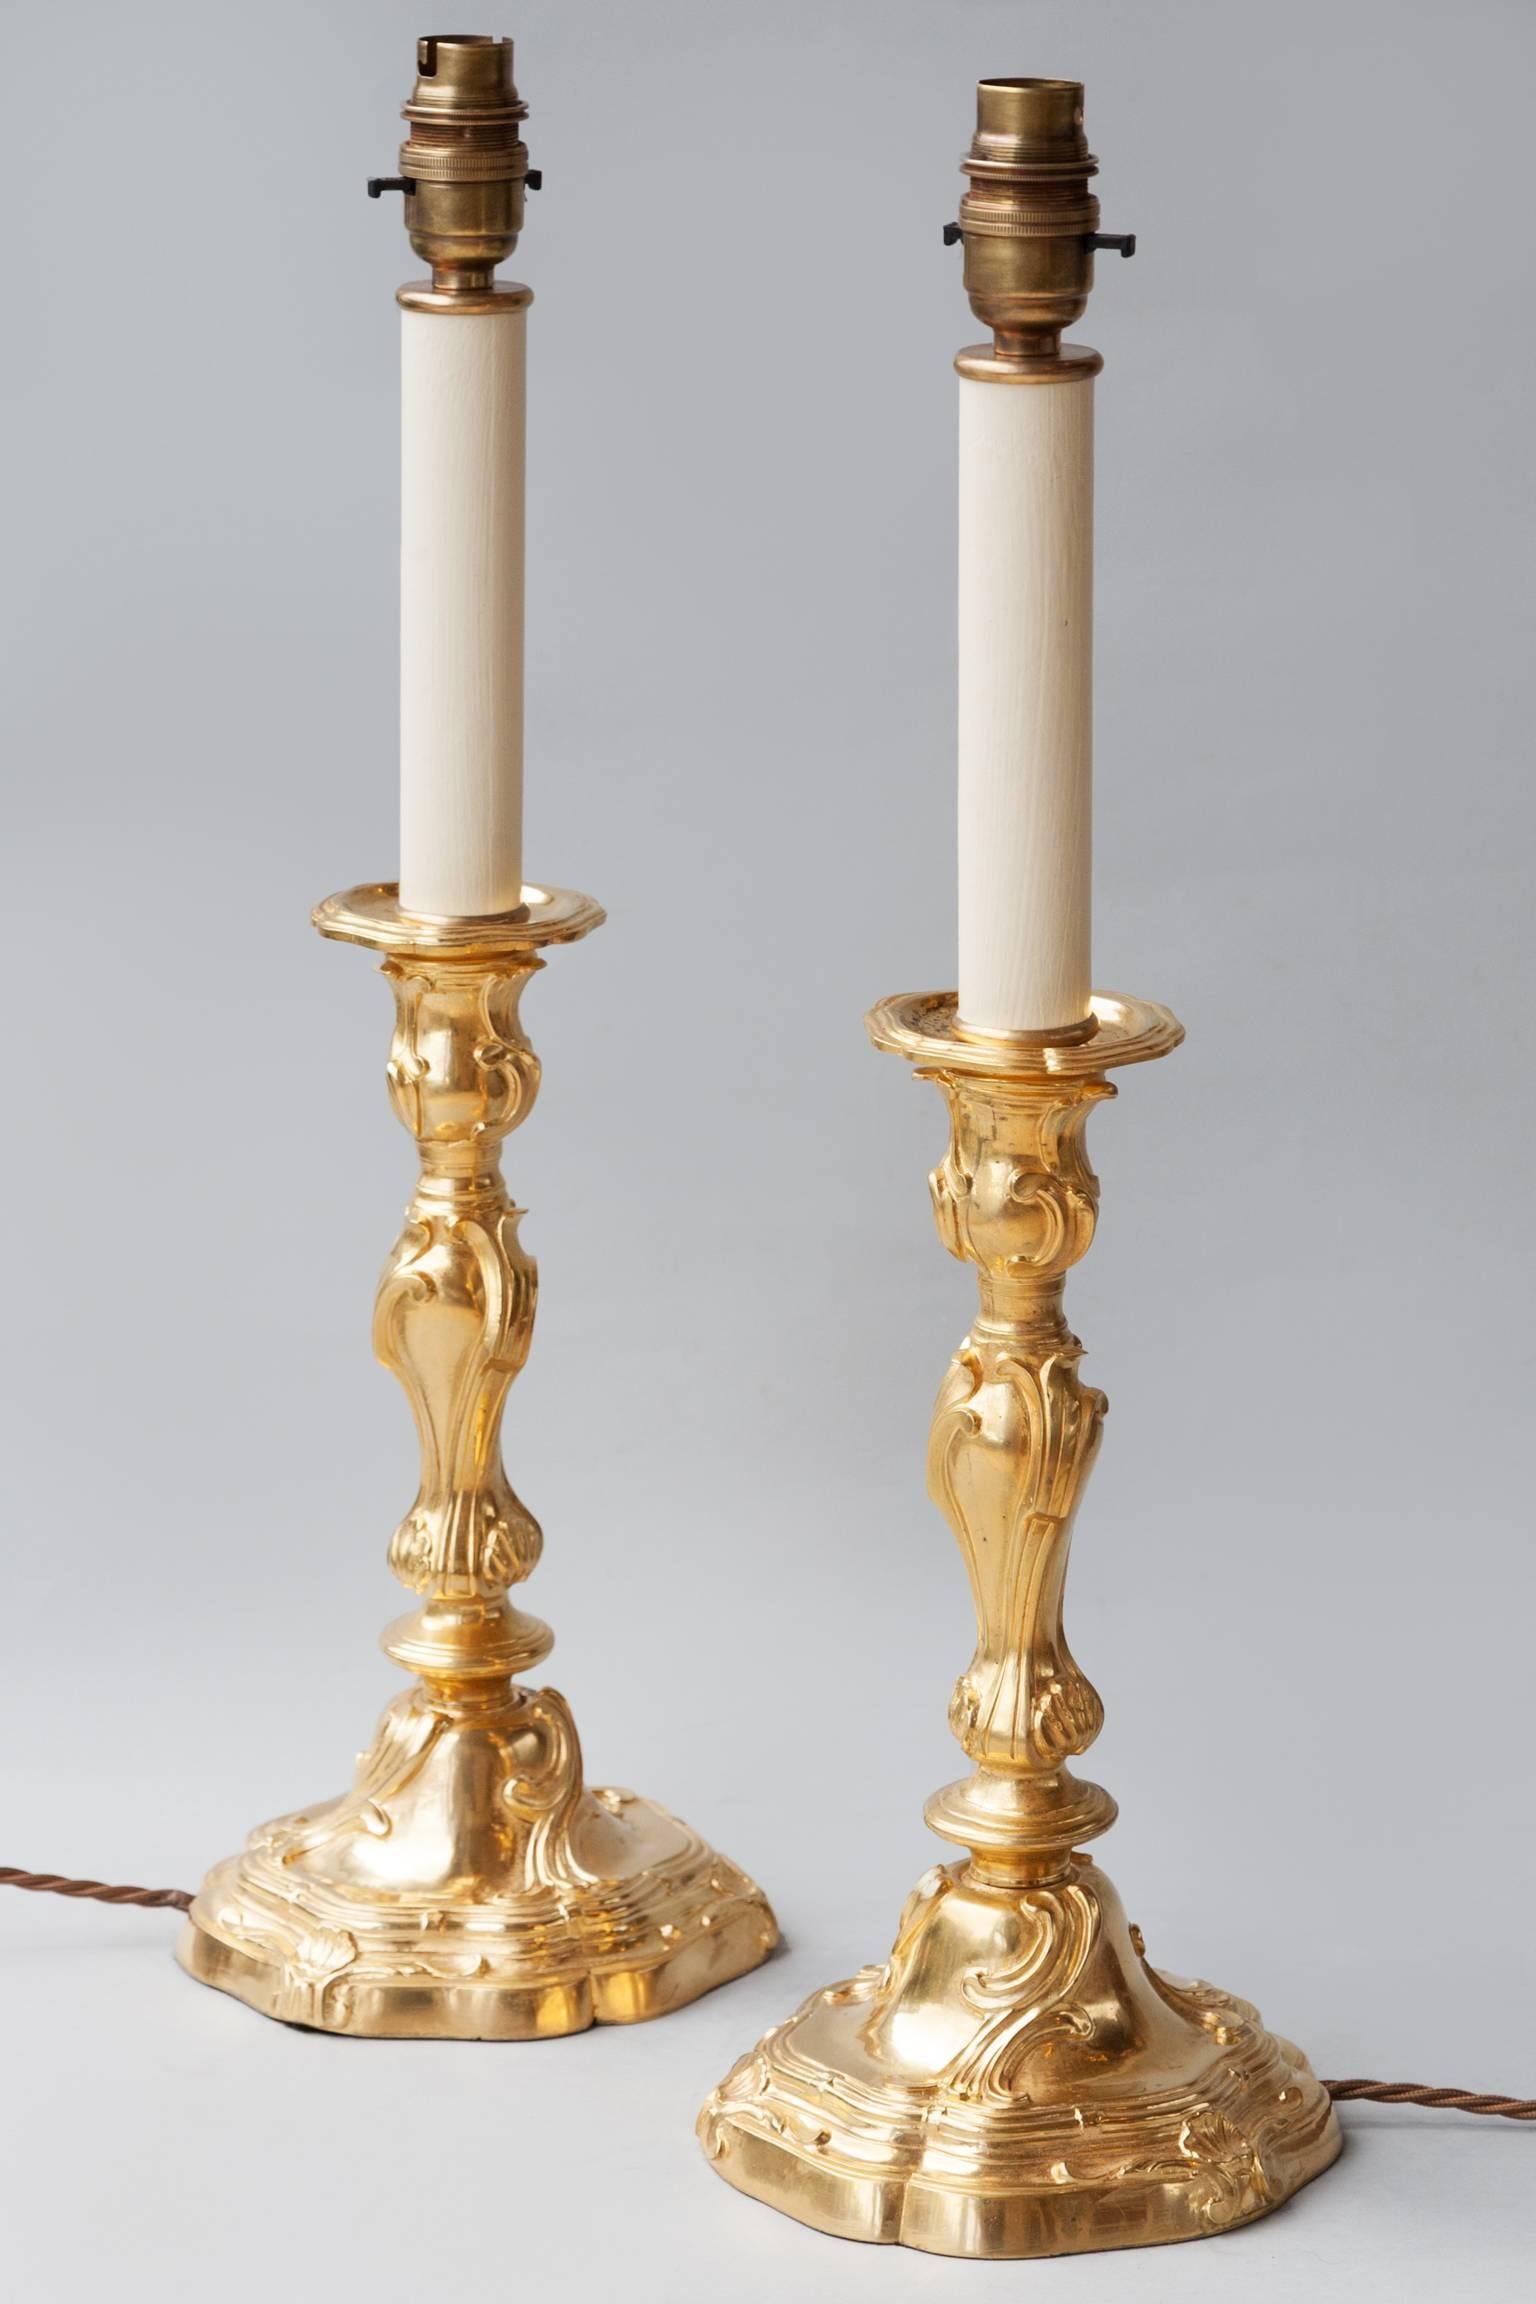 Pair of gilt bronze Louis XV style candlesticks with ornate scrolling design and shell motifs.
France, circa 1880. 
Presently converted to lamps with faux candles and electrified for the UK.
Shown here with 14